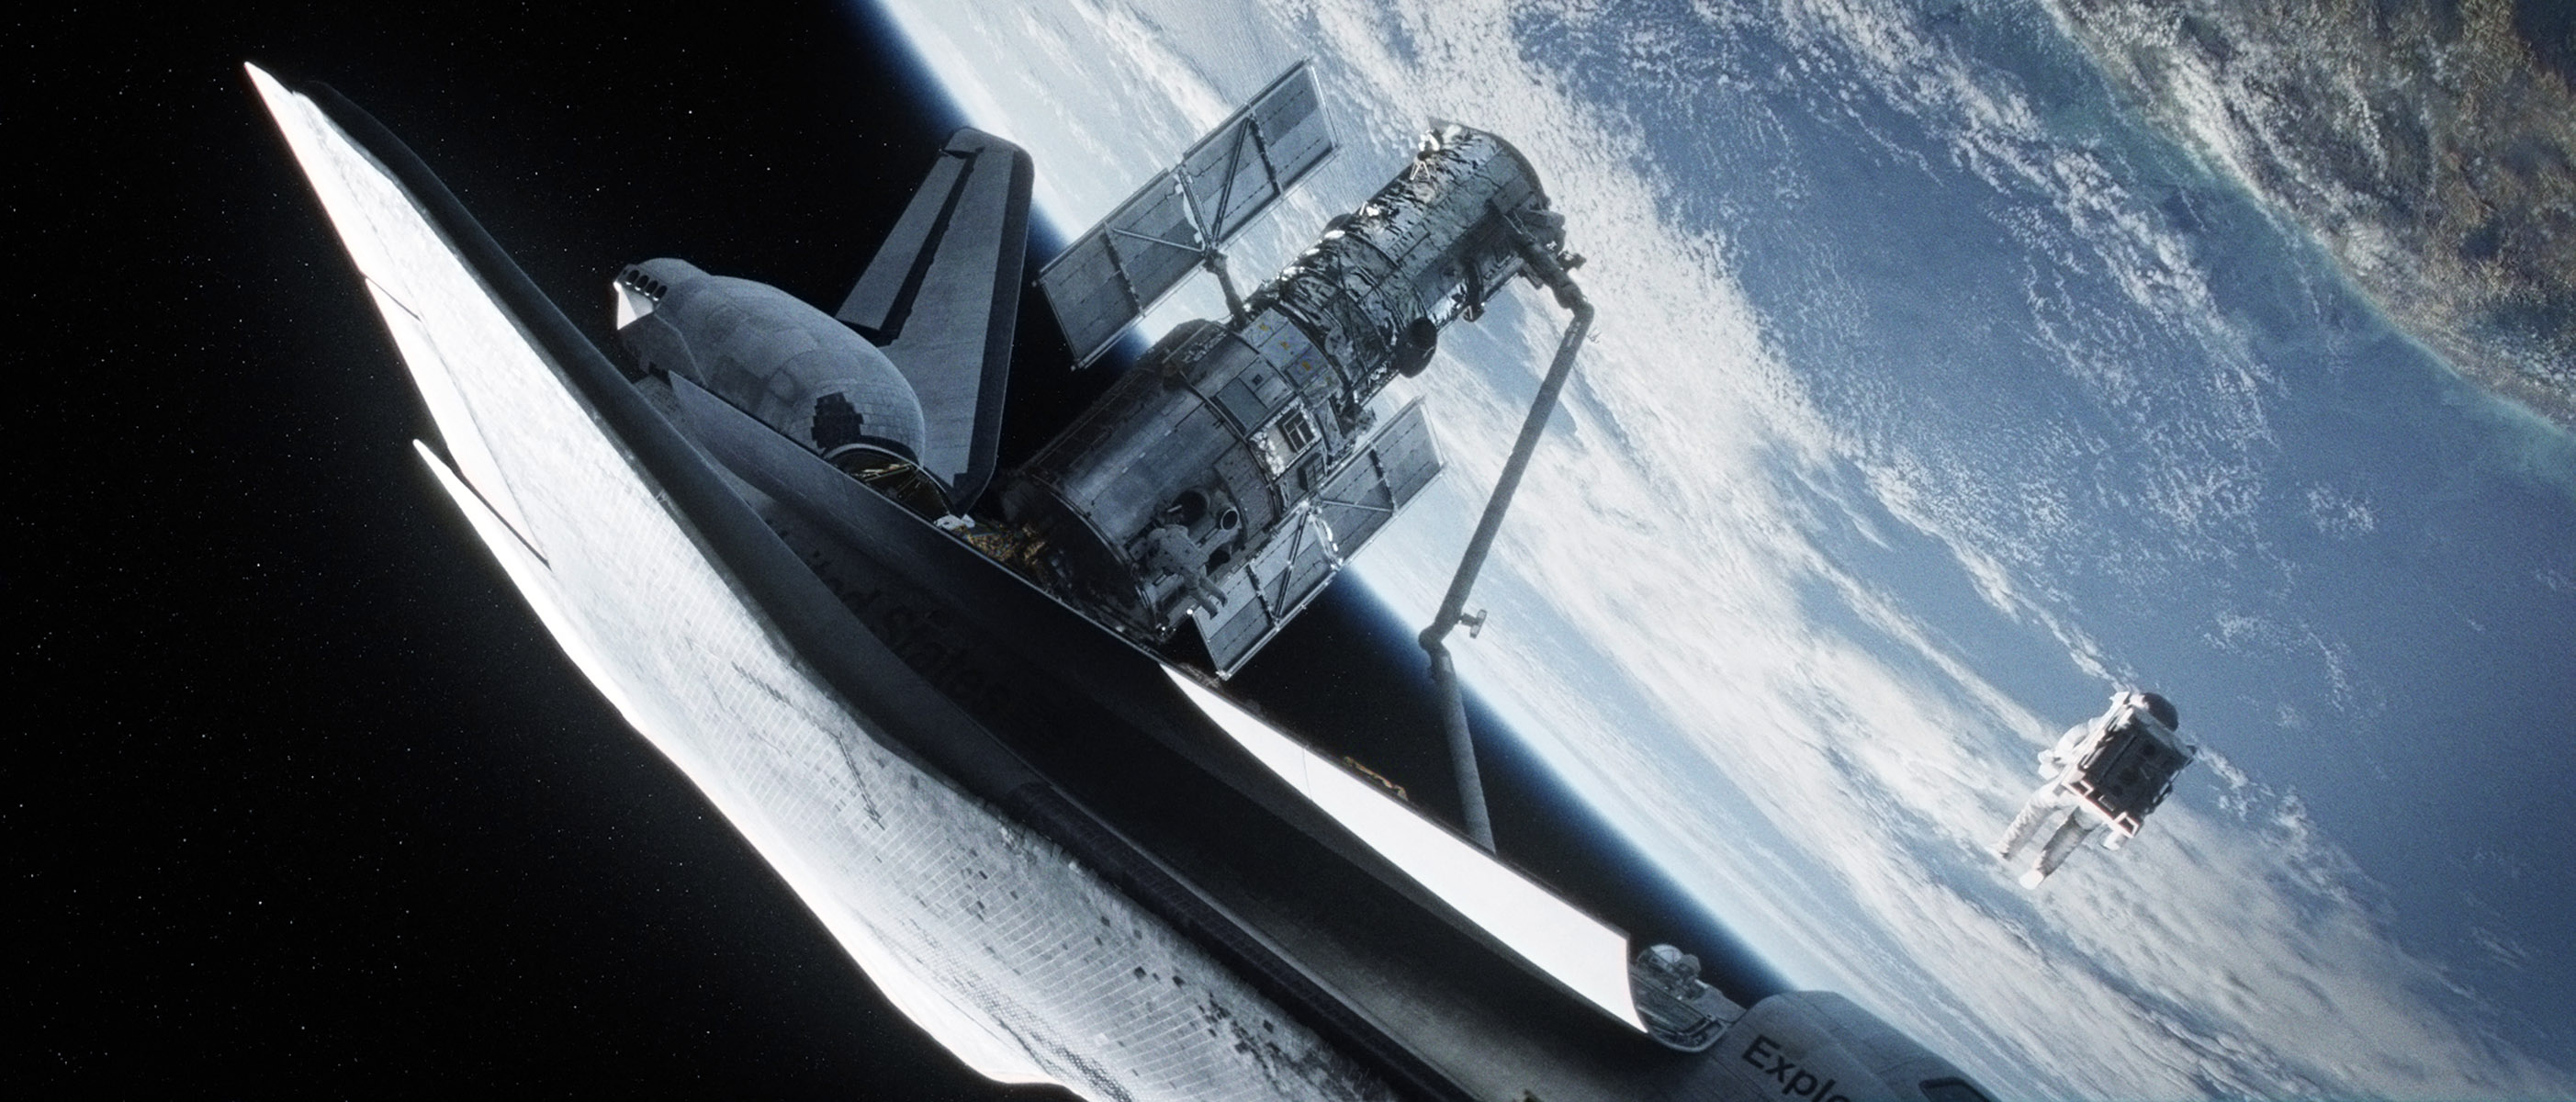 Photos 'Gravity' Film Showcases Smashing Action in Outer Space Space